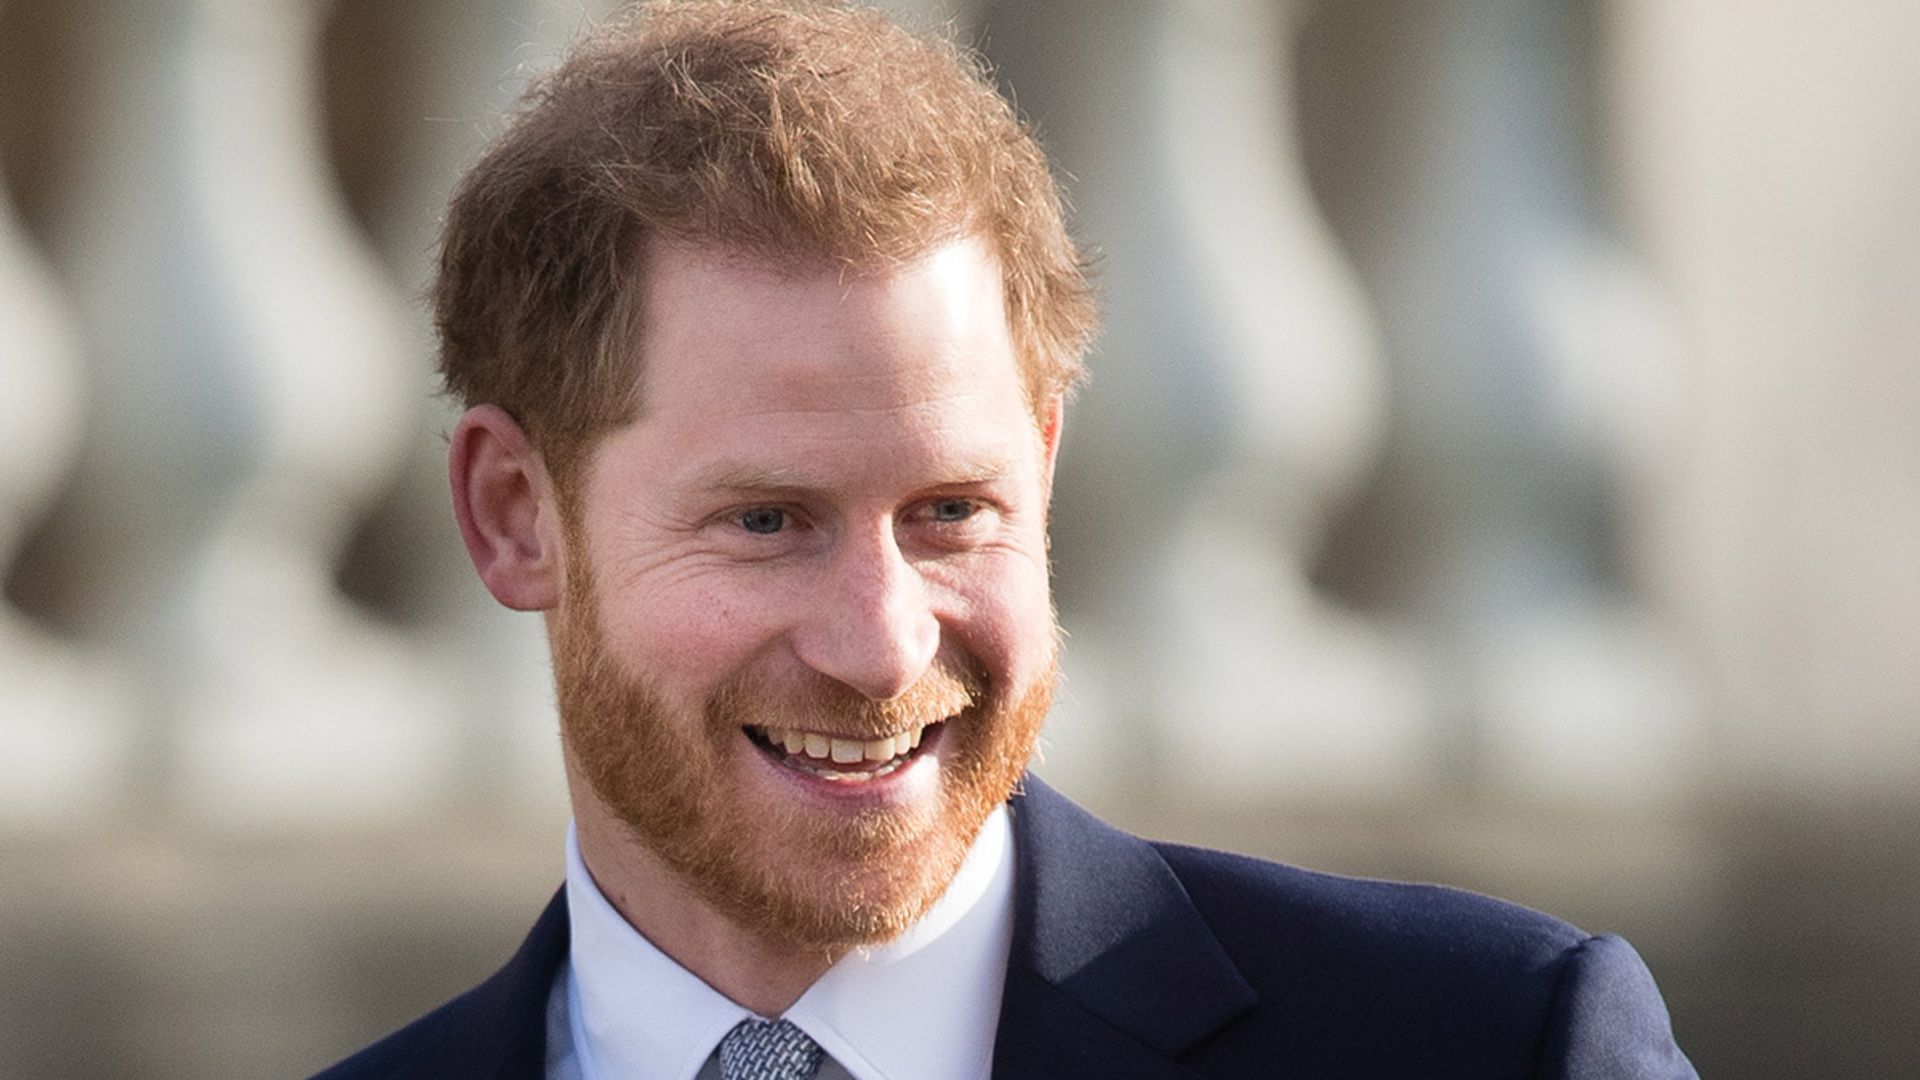 prince harry smiling distance